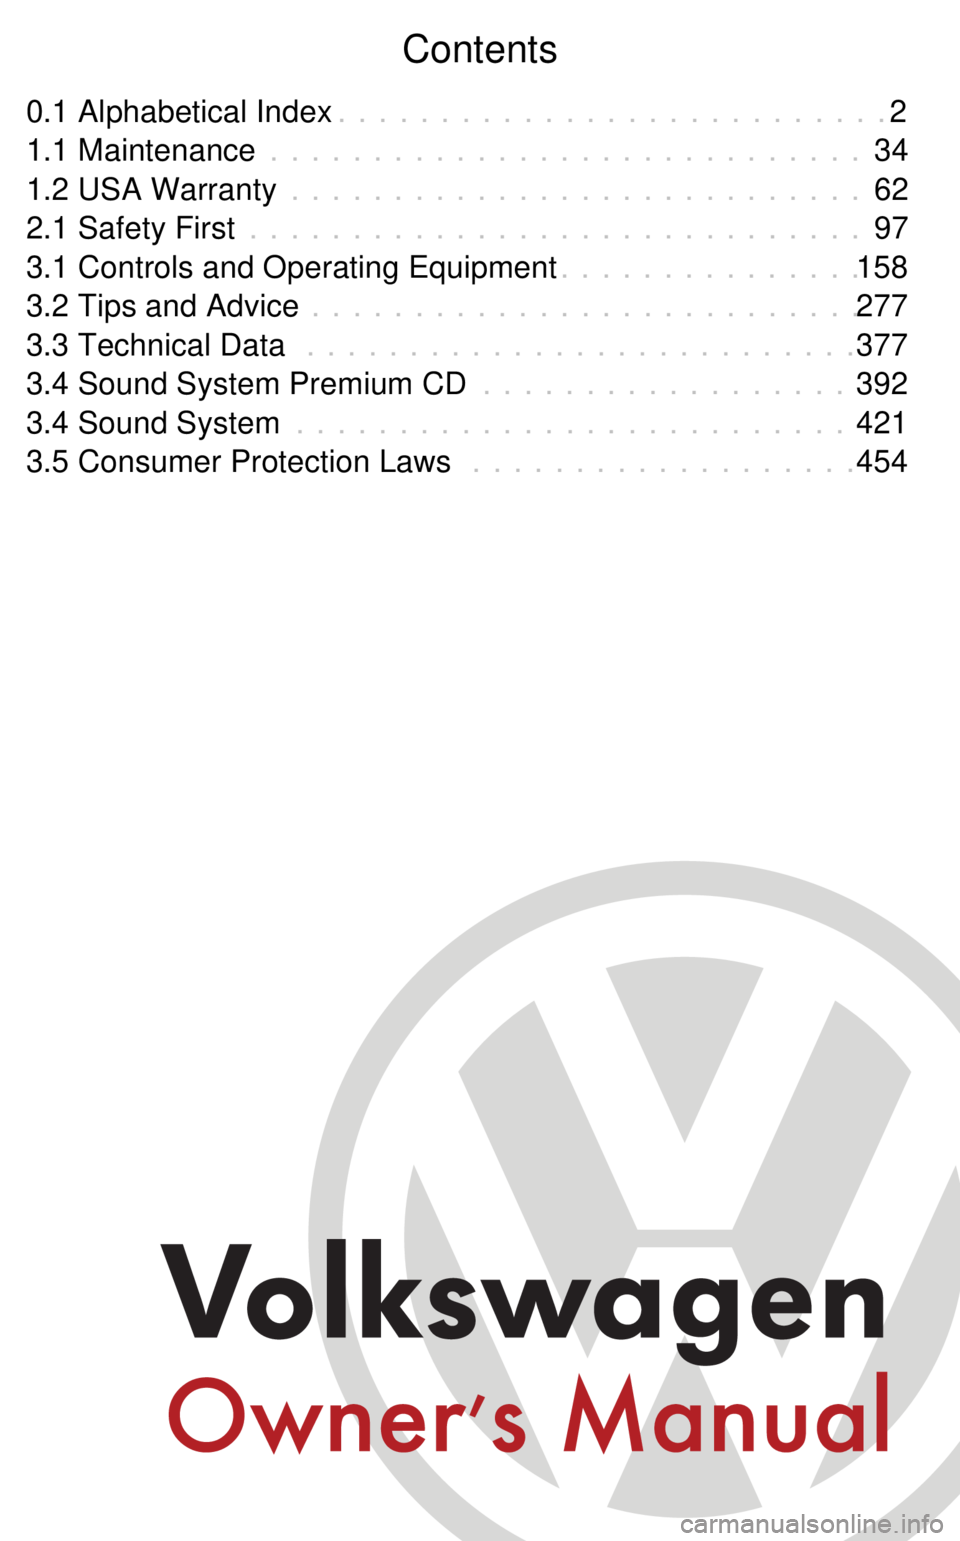 VOLKSWAGEN GOLF 2002  Owners Manual Contents
0.1 Alphabetical Index 2
. . . . . . . . . . . . . . . . . . . . . . . . . . .
1.1 Maintenance 34
. . . . . . . . . . . . . . . . . . . . . . . . . . . . .
1.2 USA Warranty 62
. . . . . . . .